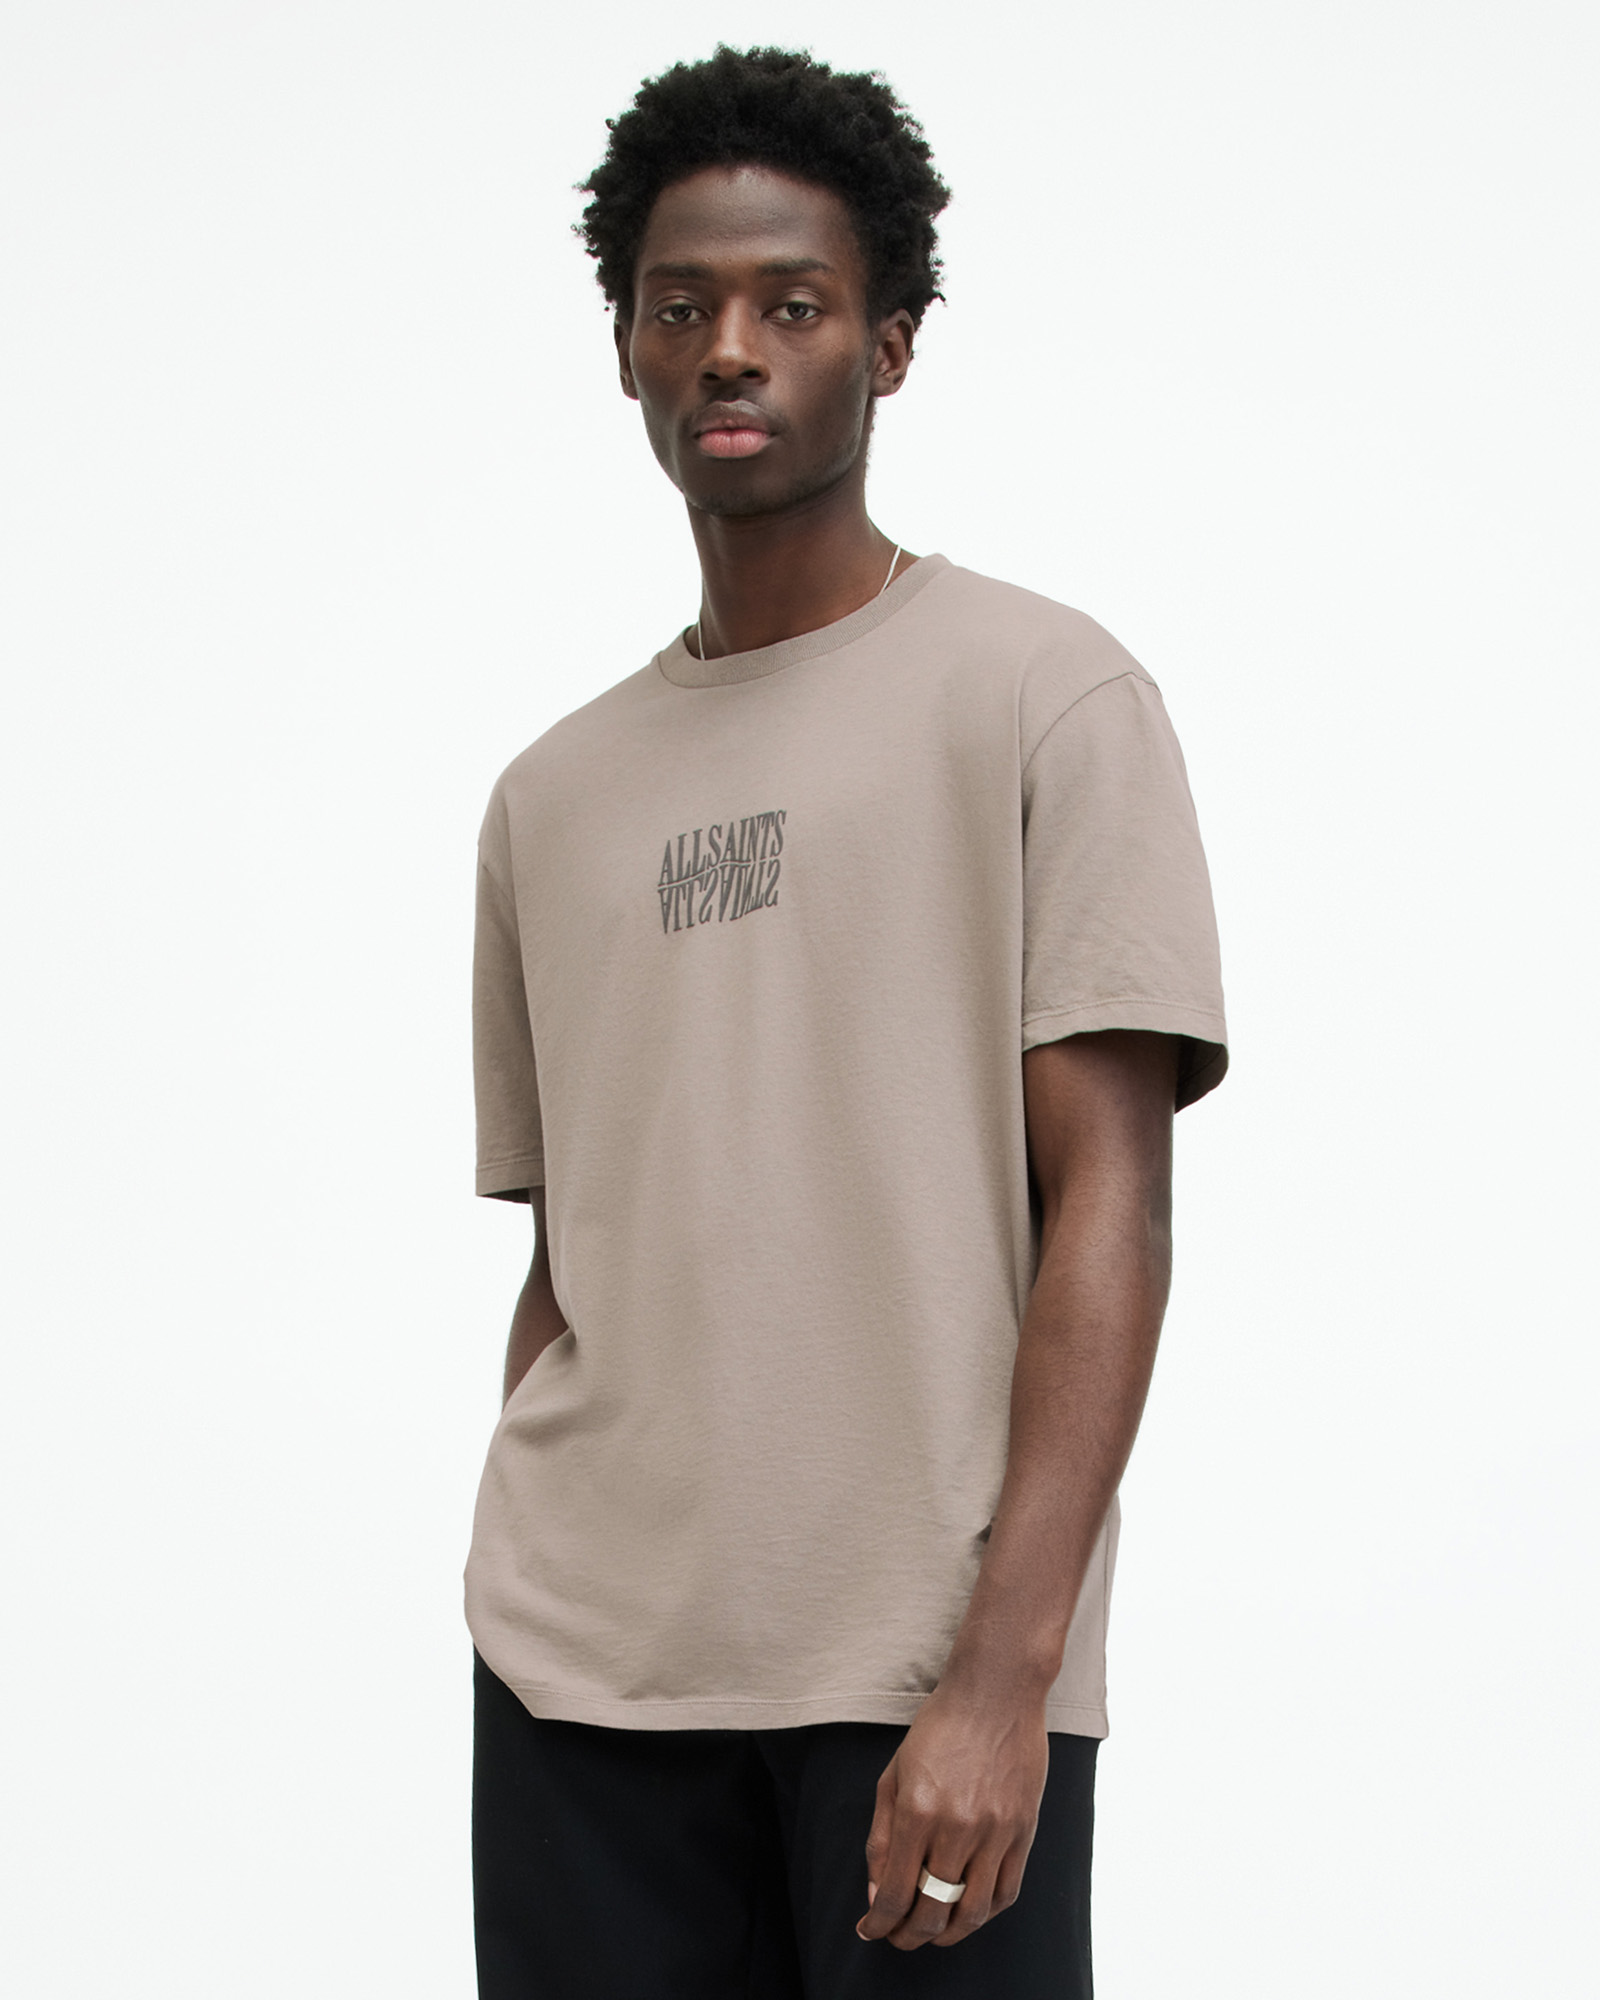 Relaxed Logo TAUPE Fit | Warped T-Shirt Varden ALLSAINTS CHESTNUT US